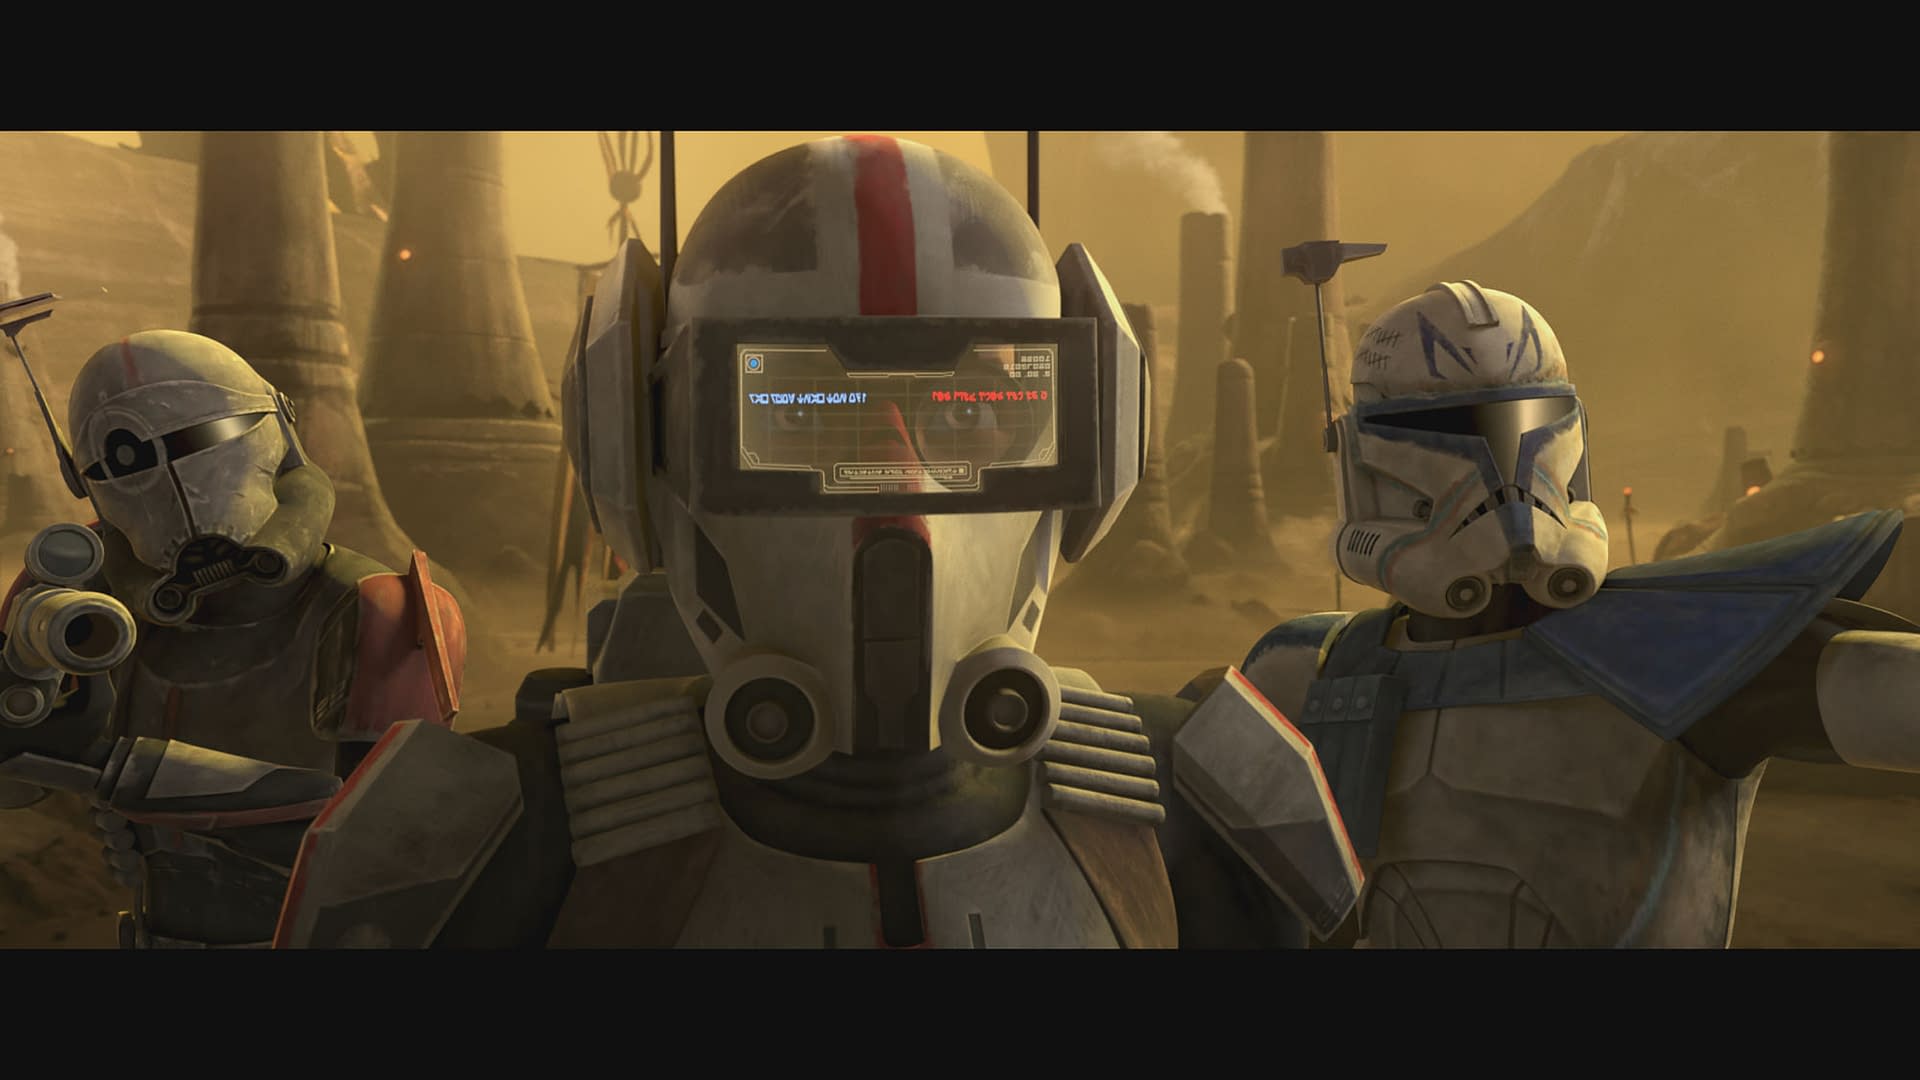 "Star Wars: The Clone Wars" Season 7 Preview: Rex Is Haunted By "A Distant Echo"